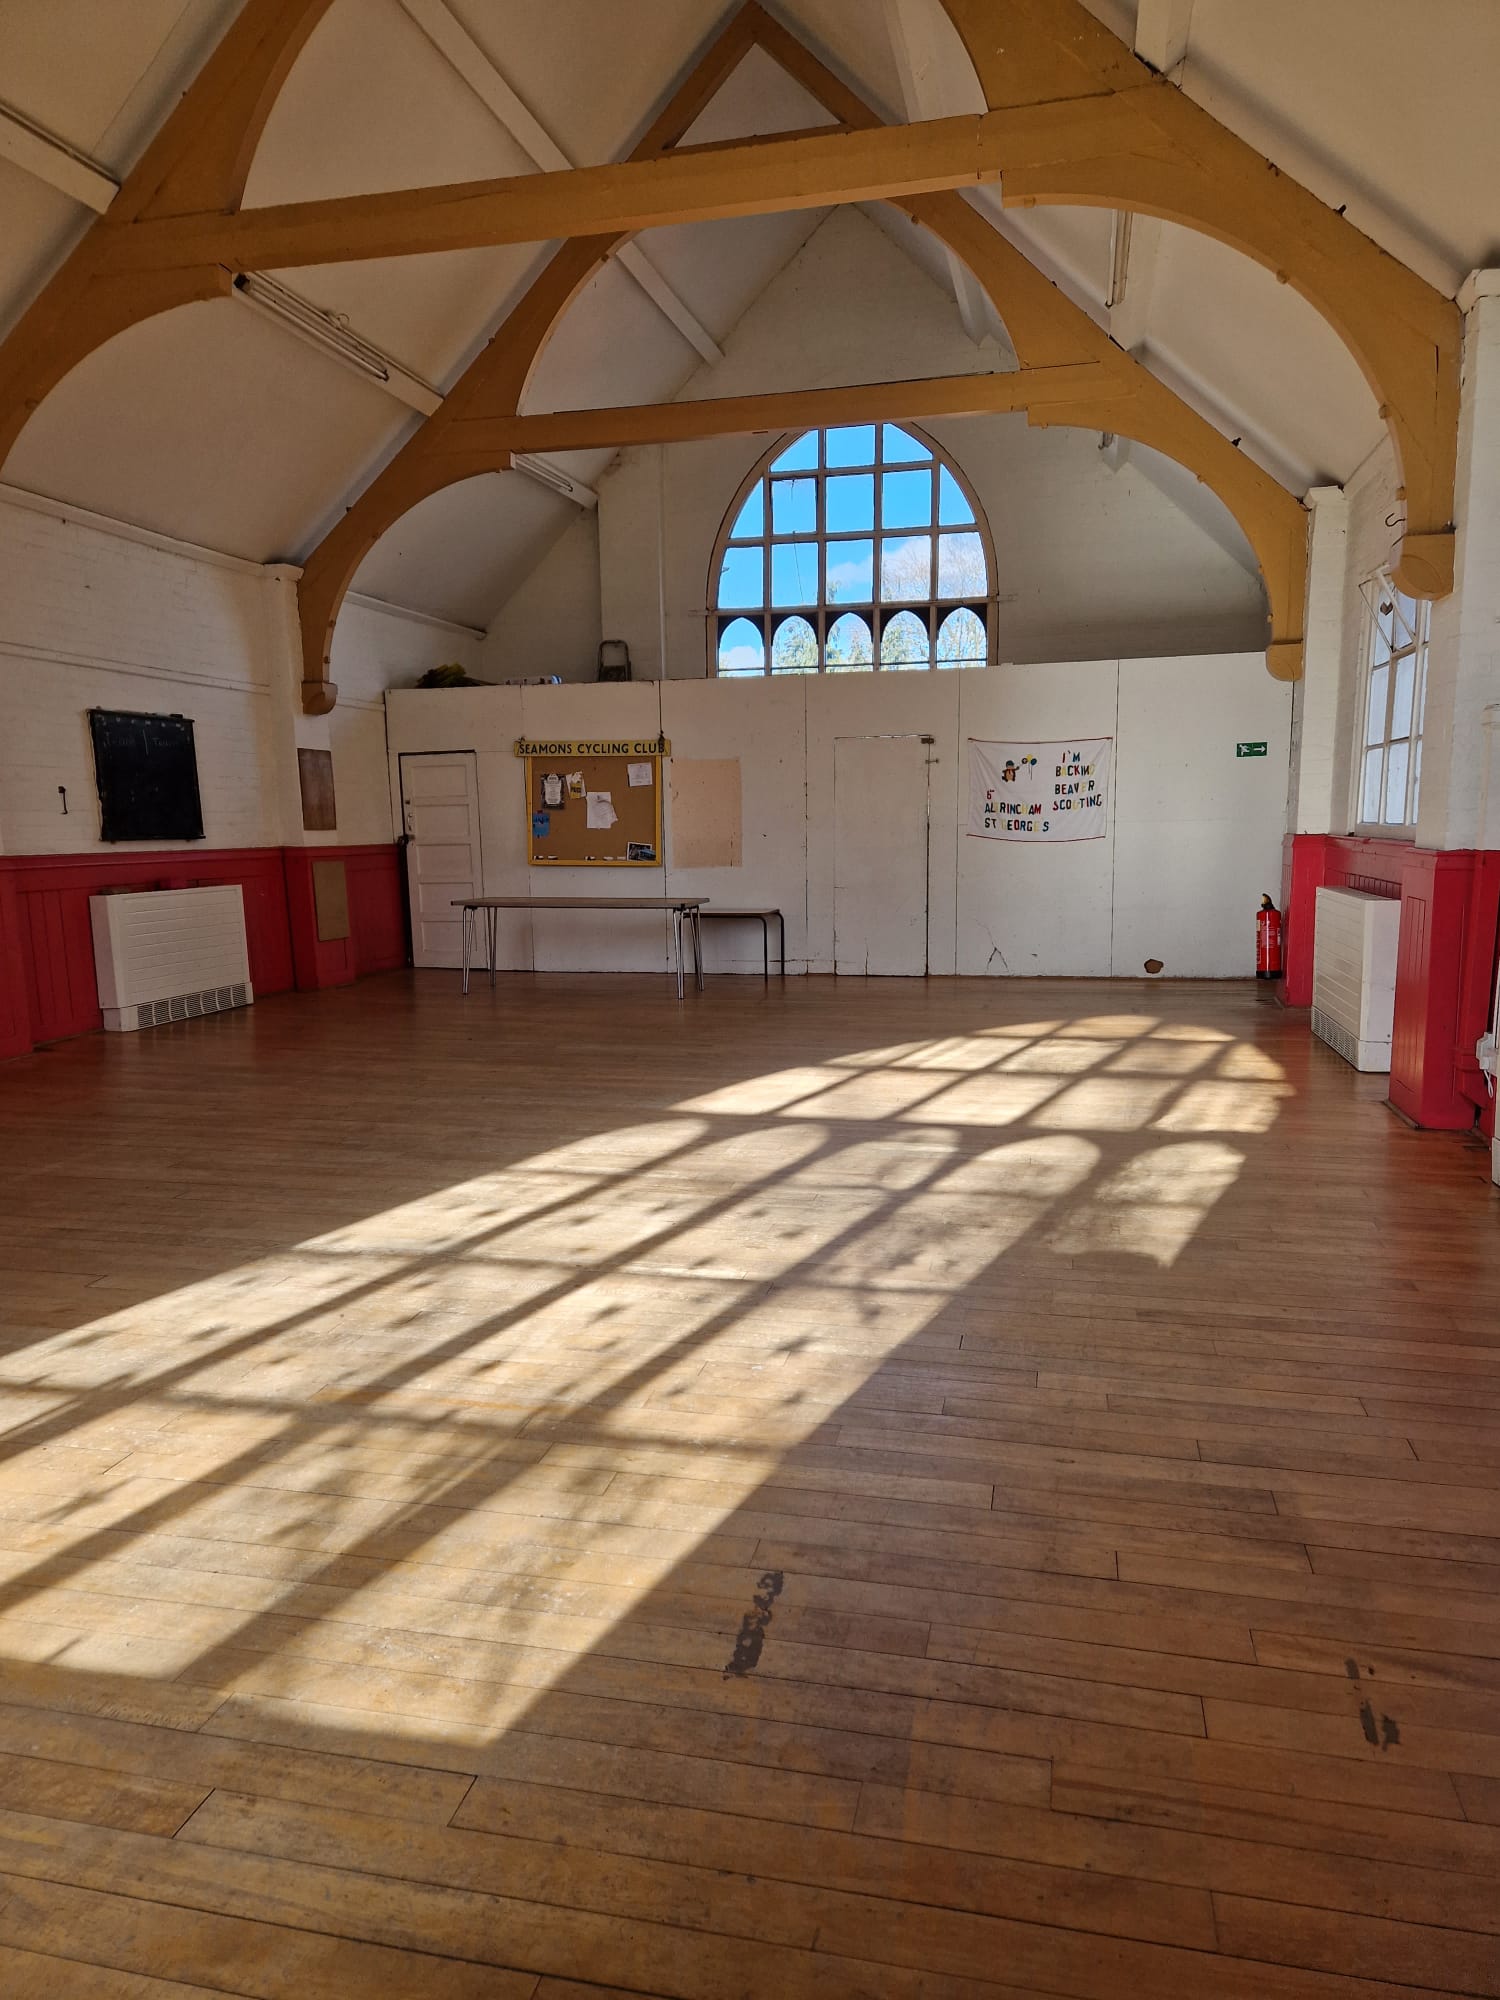 Picture of the inside hall of the Old School Building